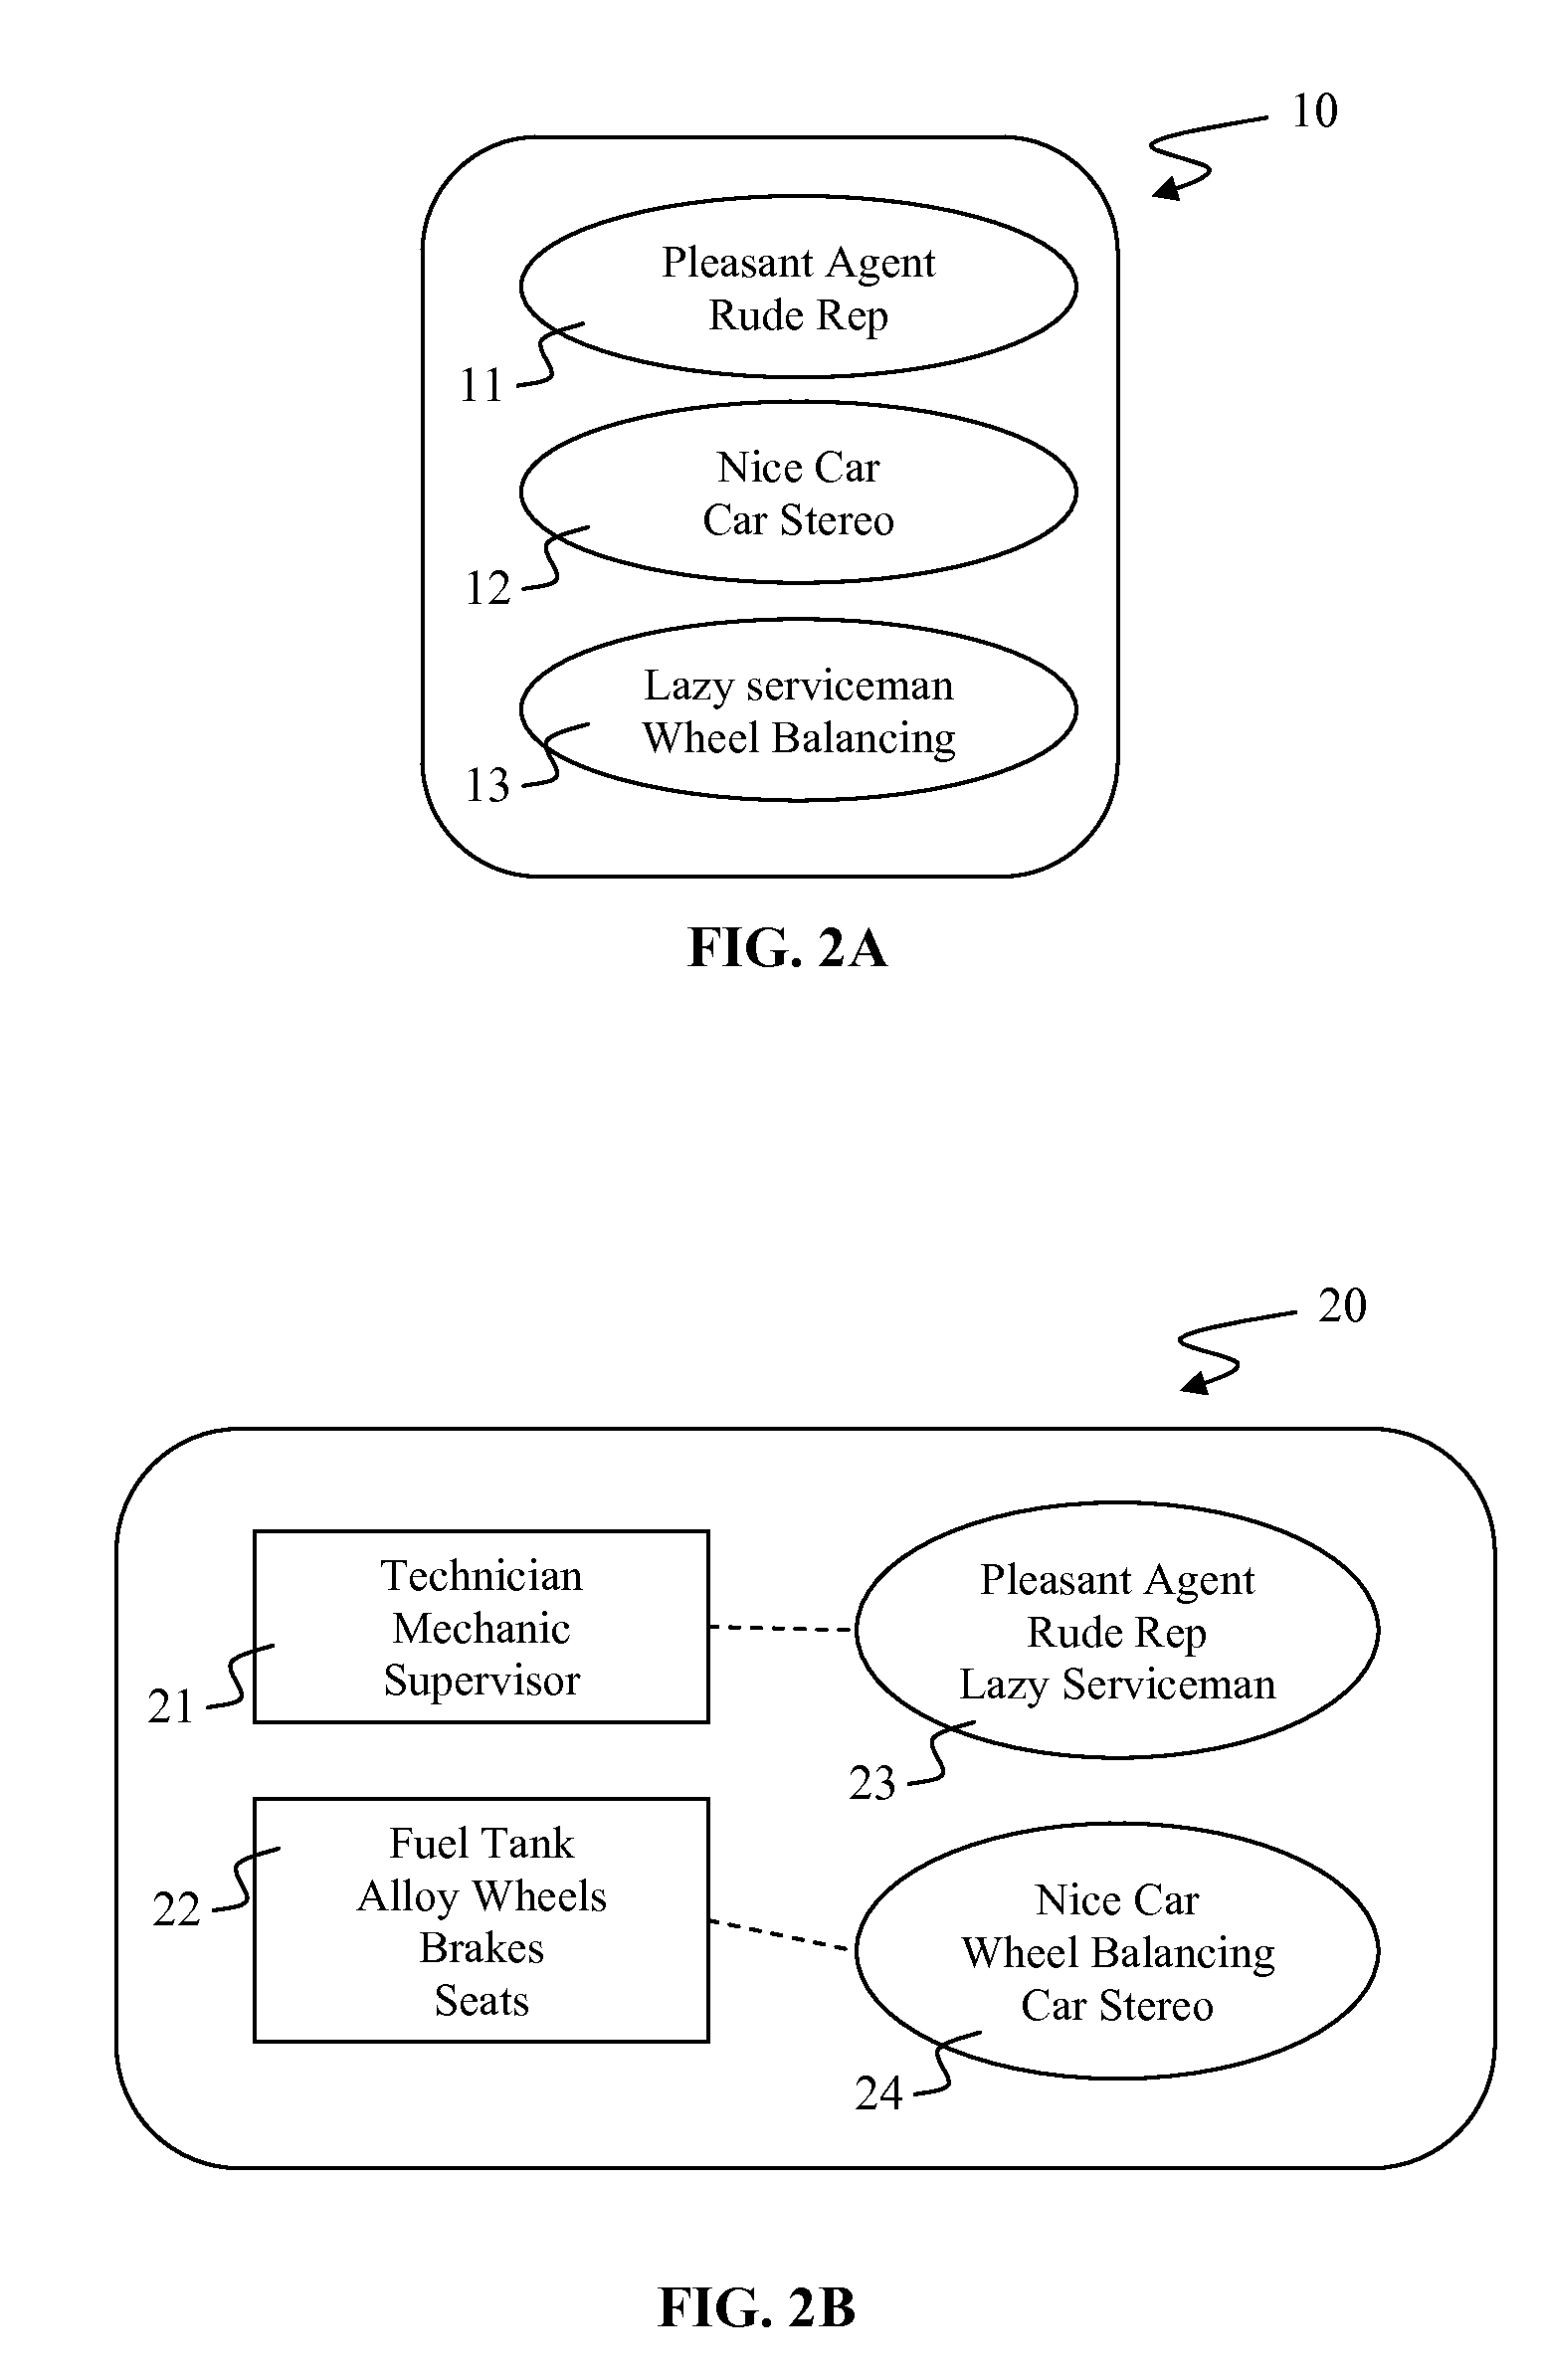 Cross-domain clusterability evaluation for cross-guided data clustering based on alignment between data domains